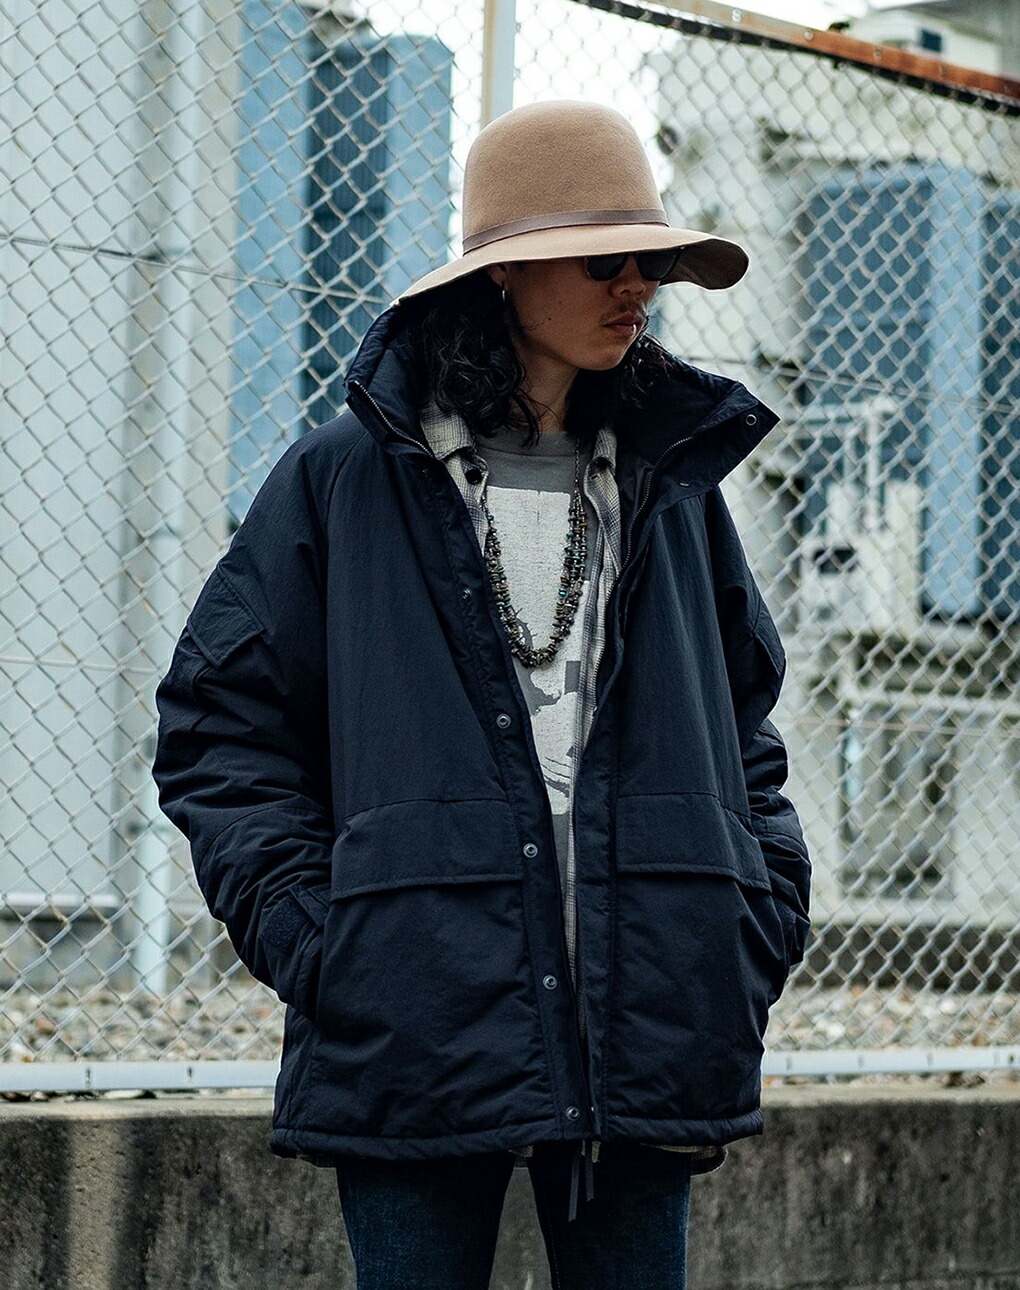 marka / マーカ ： 【ONLY ARK】別注 PUFFED ECWCS JACKET - recycle